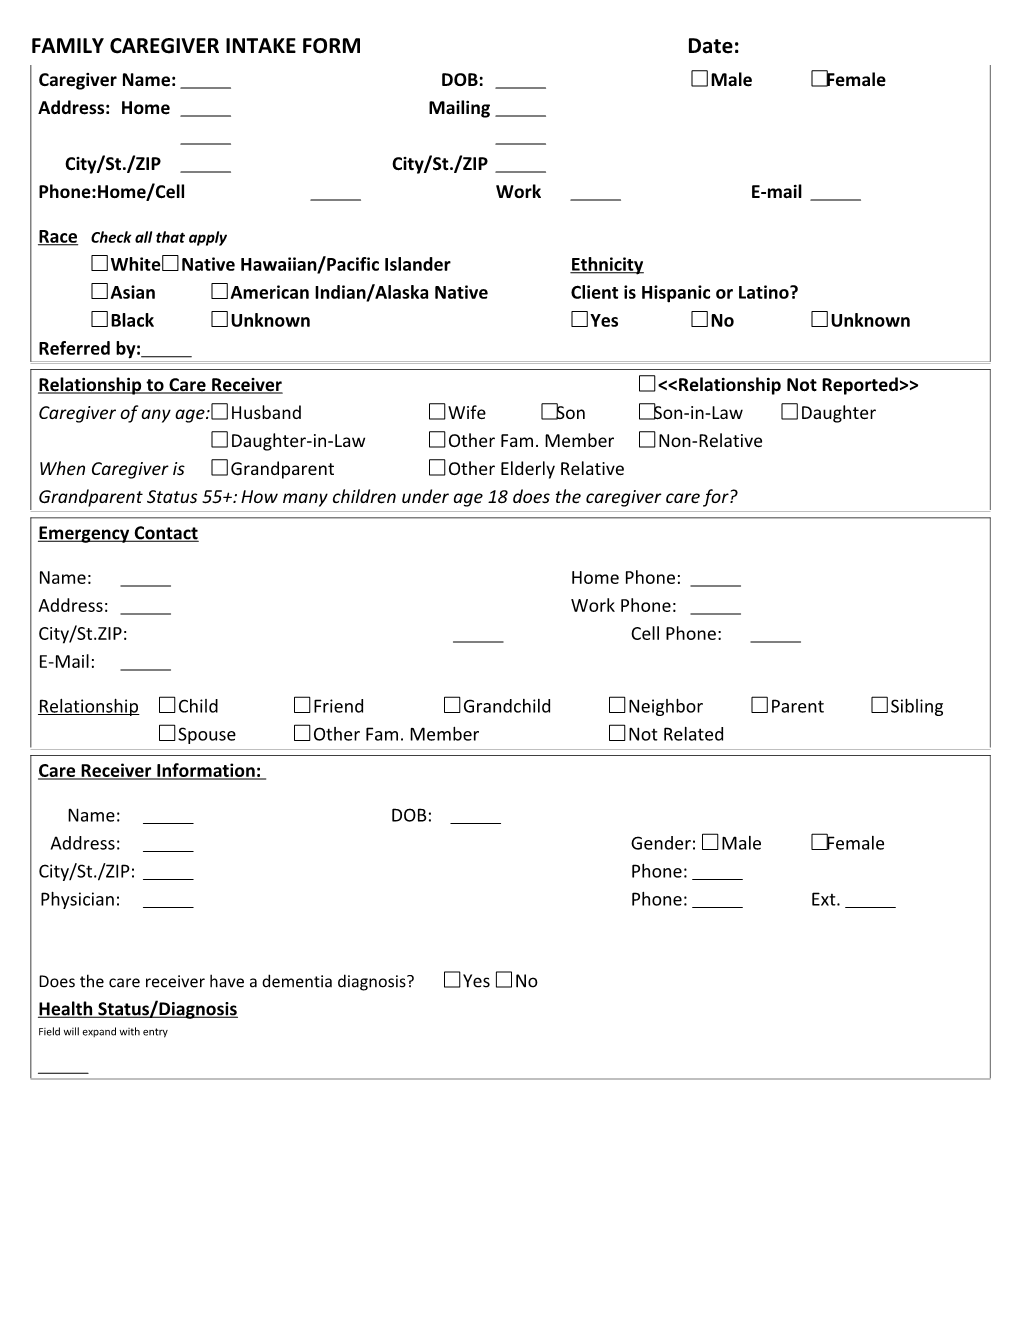 Family Caregiver Intake Form Electronic